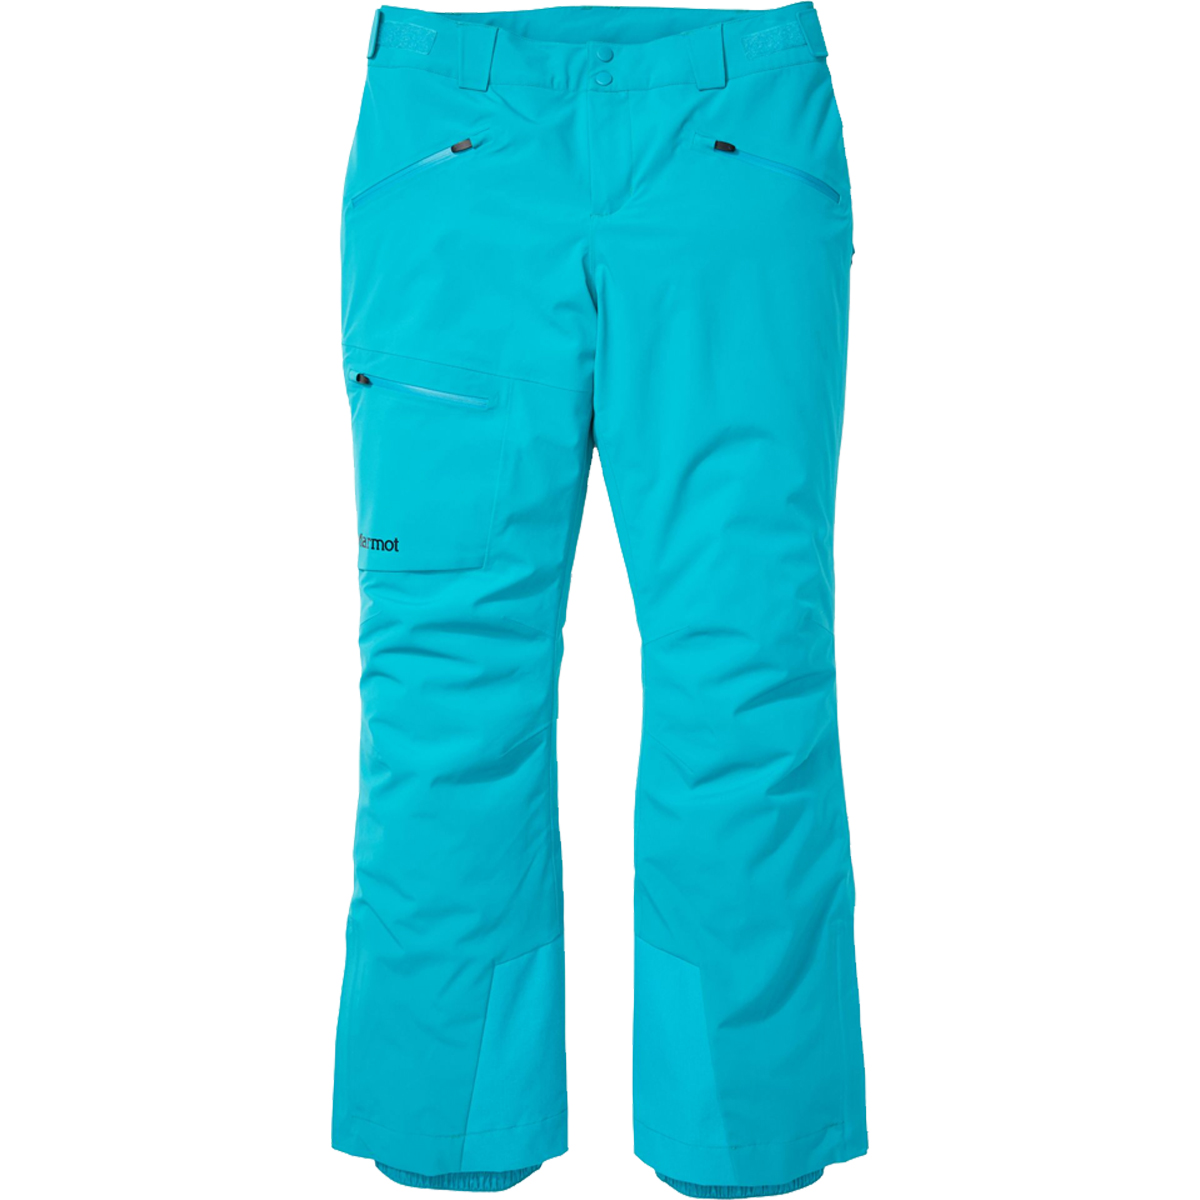 Marmot Refuge Pant - Women's  Up to 68% Off 5 Star Rating w/ Free S&H